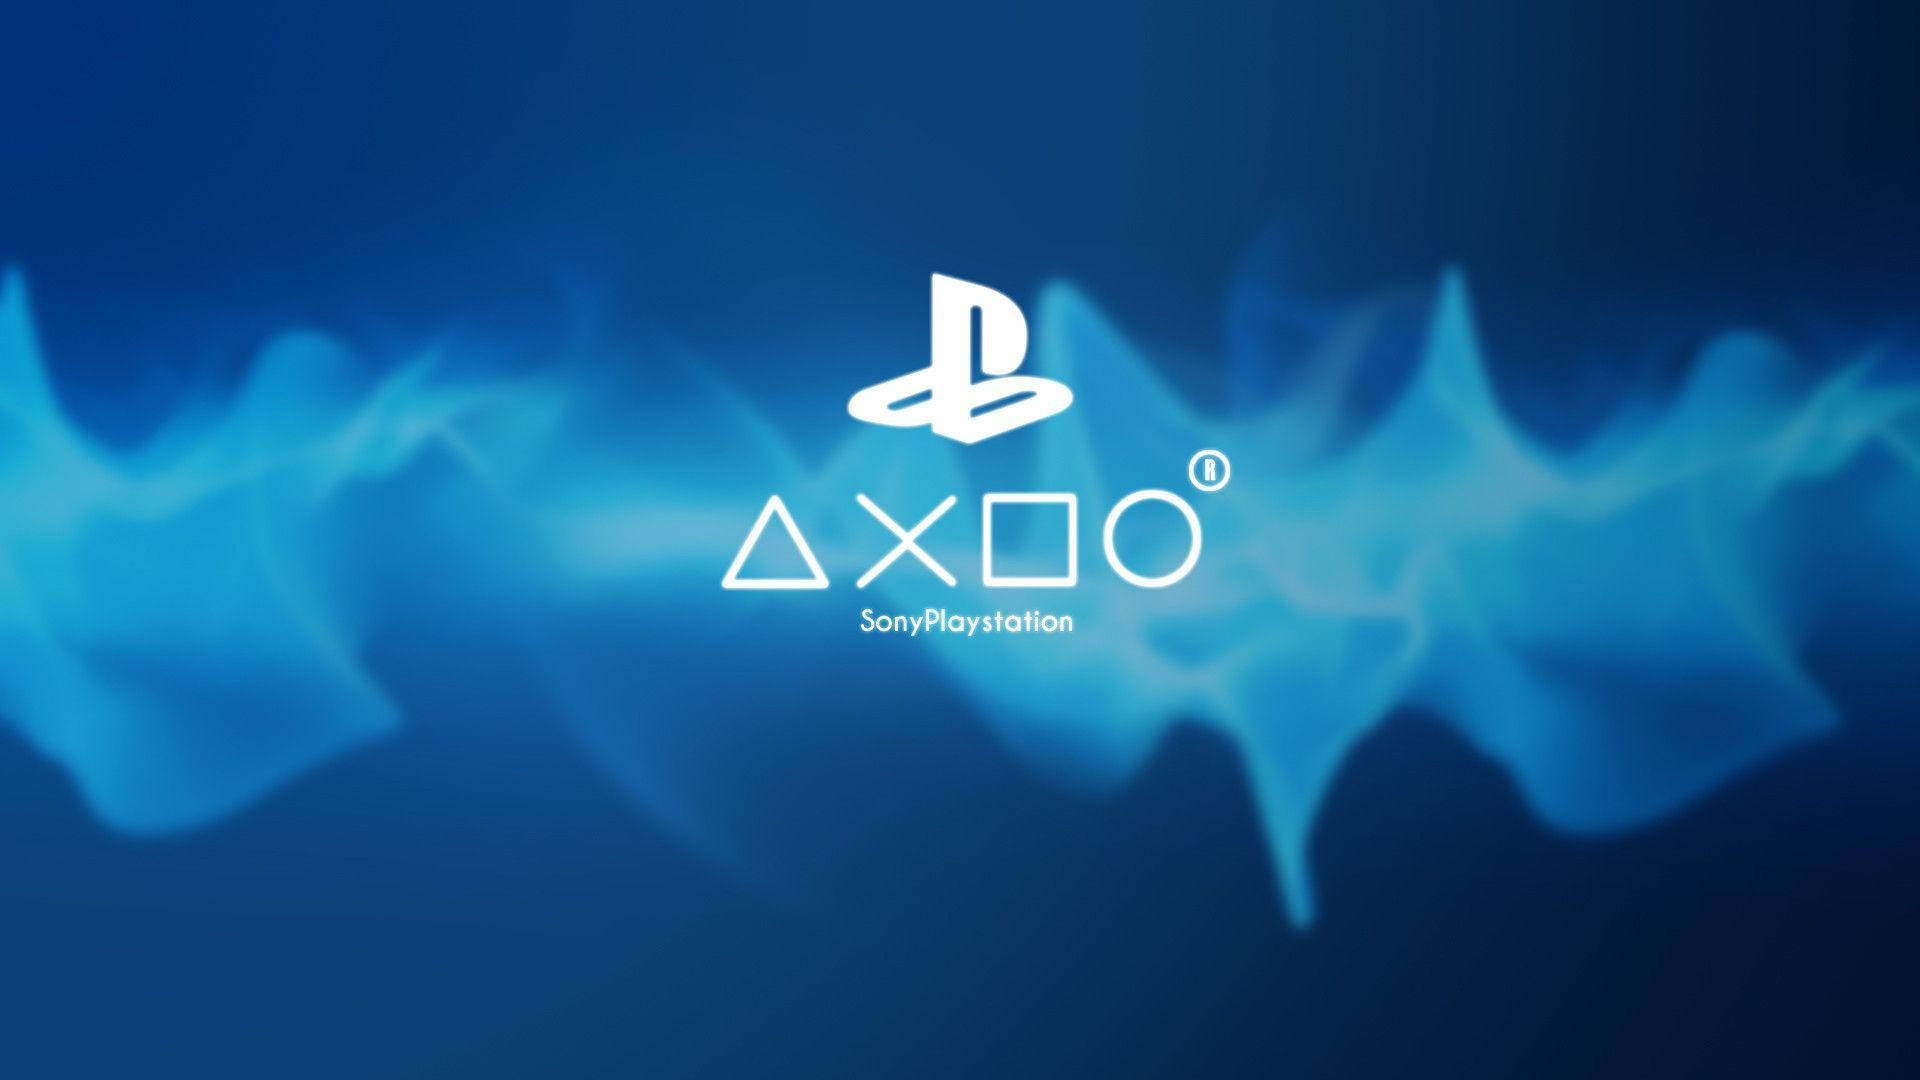 Get ready to play with the amazing technology of the Smoky Blue Sony Playstation. Wallpaper